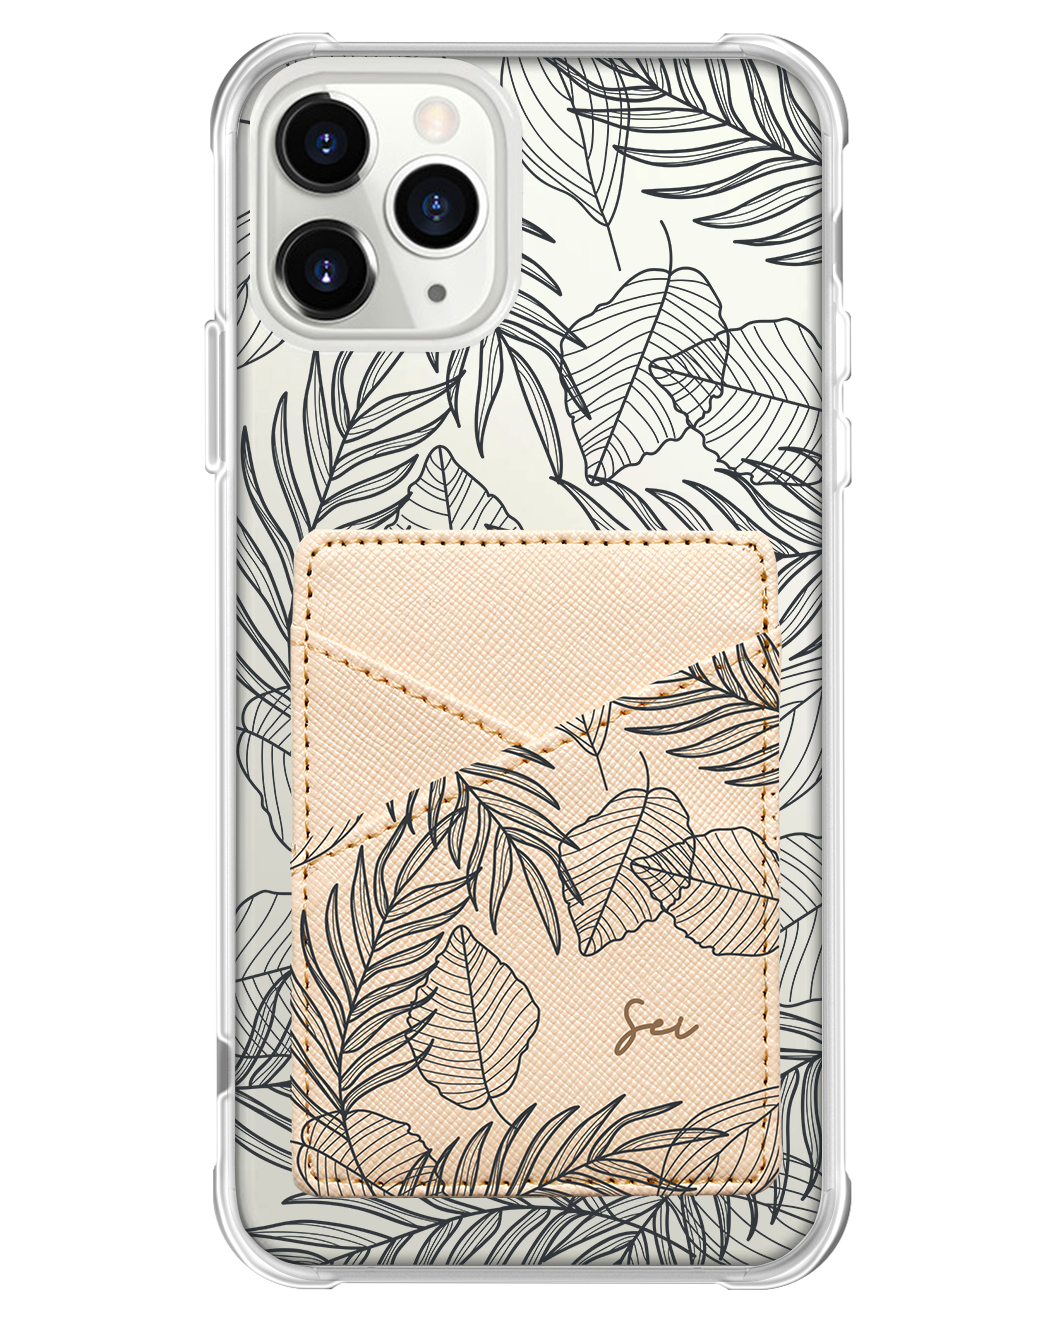 iPhone Phone Wallet Case - Sketchy Tropical 2.0